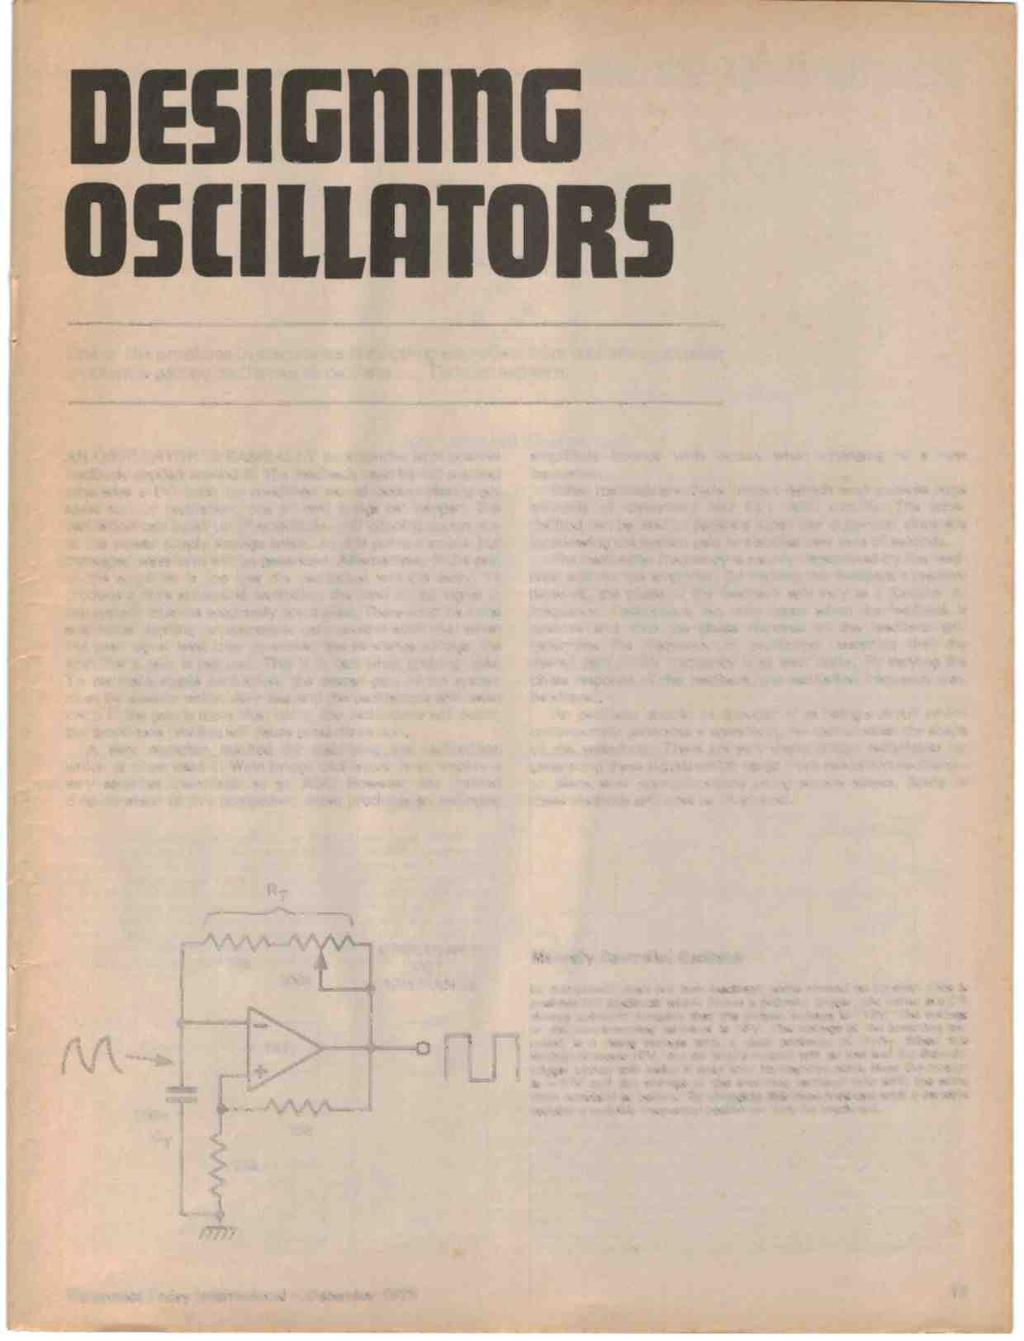 One of the problems in electronics is stopping amplifiers from oscillating, another problem is getting oscillators to oscillate... Tim Orr explains.